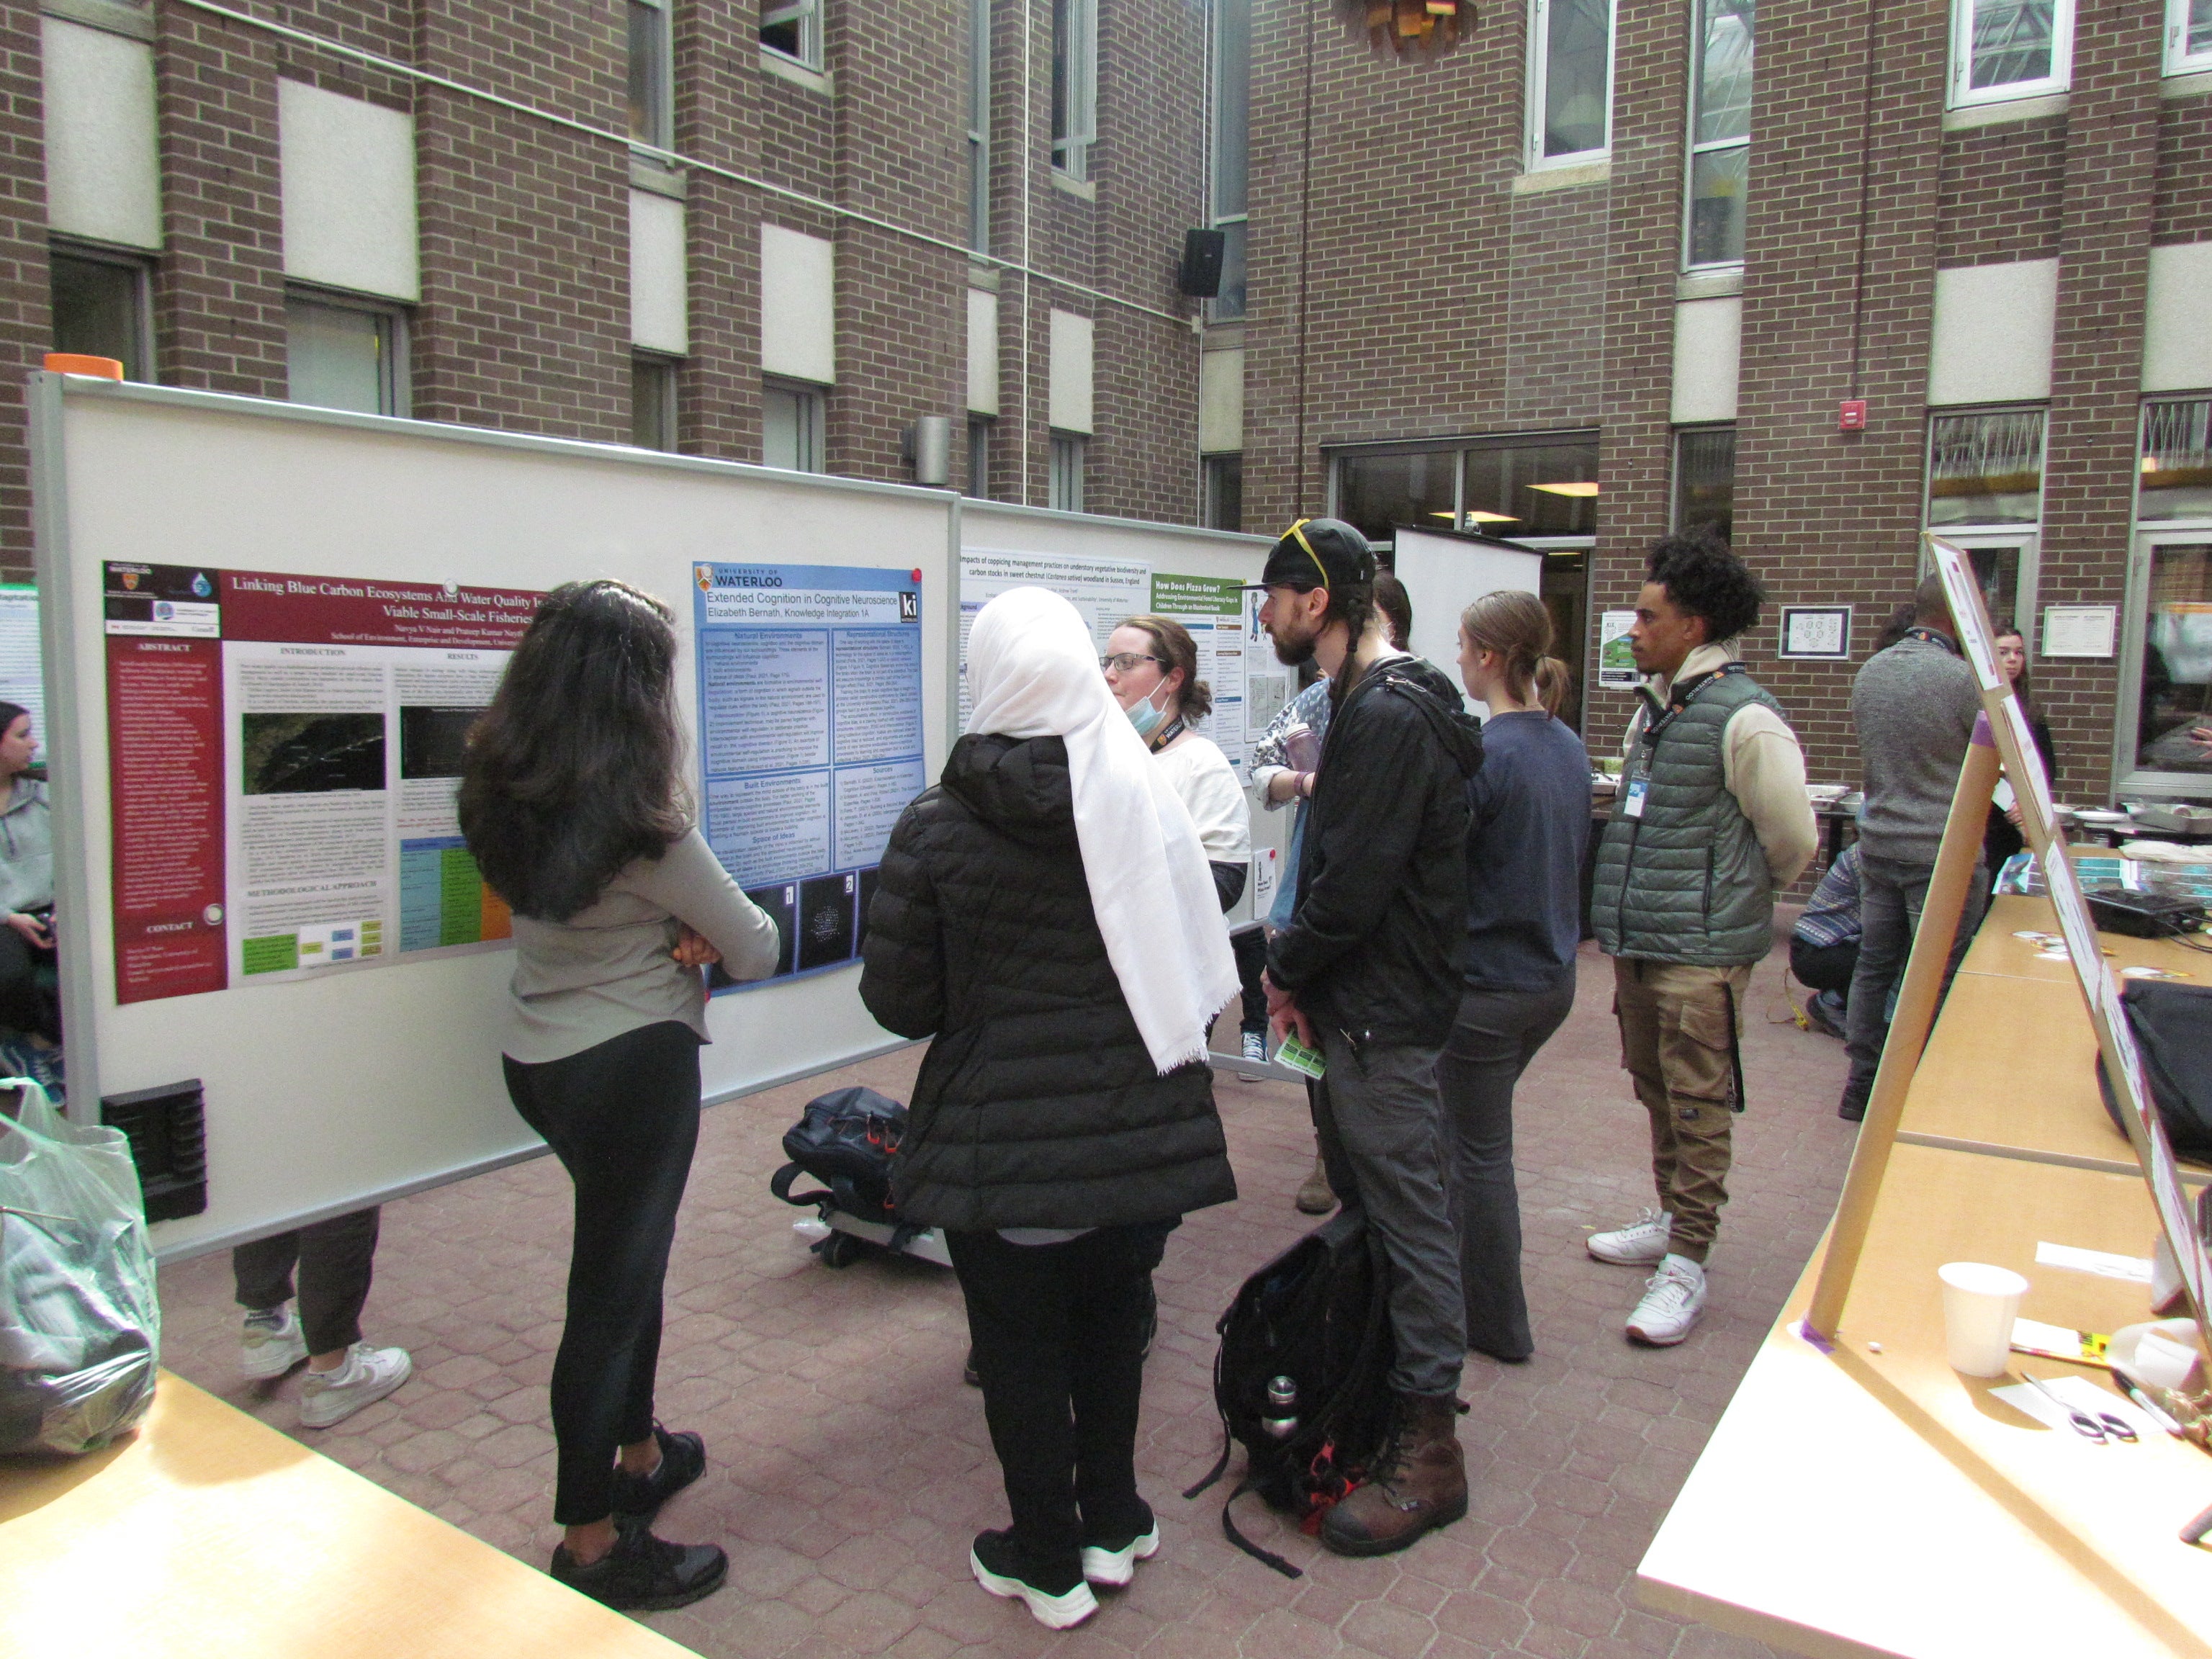 Students reading presentation board at the Student Showcase.